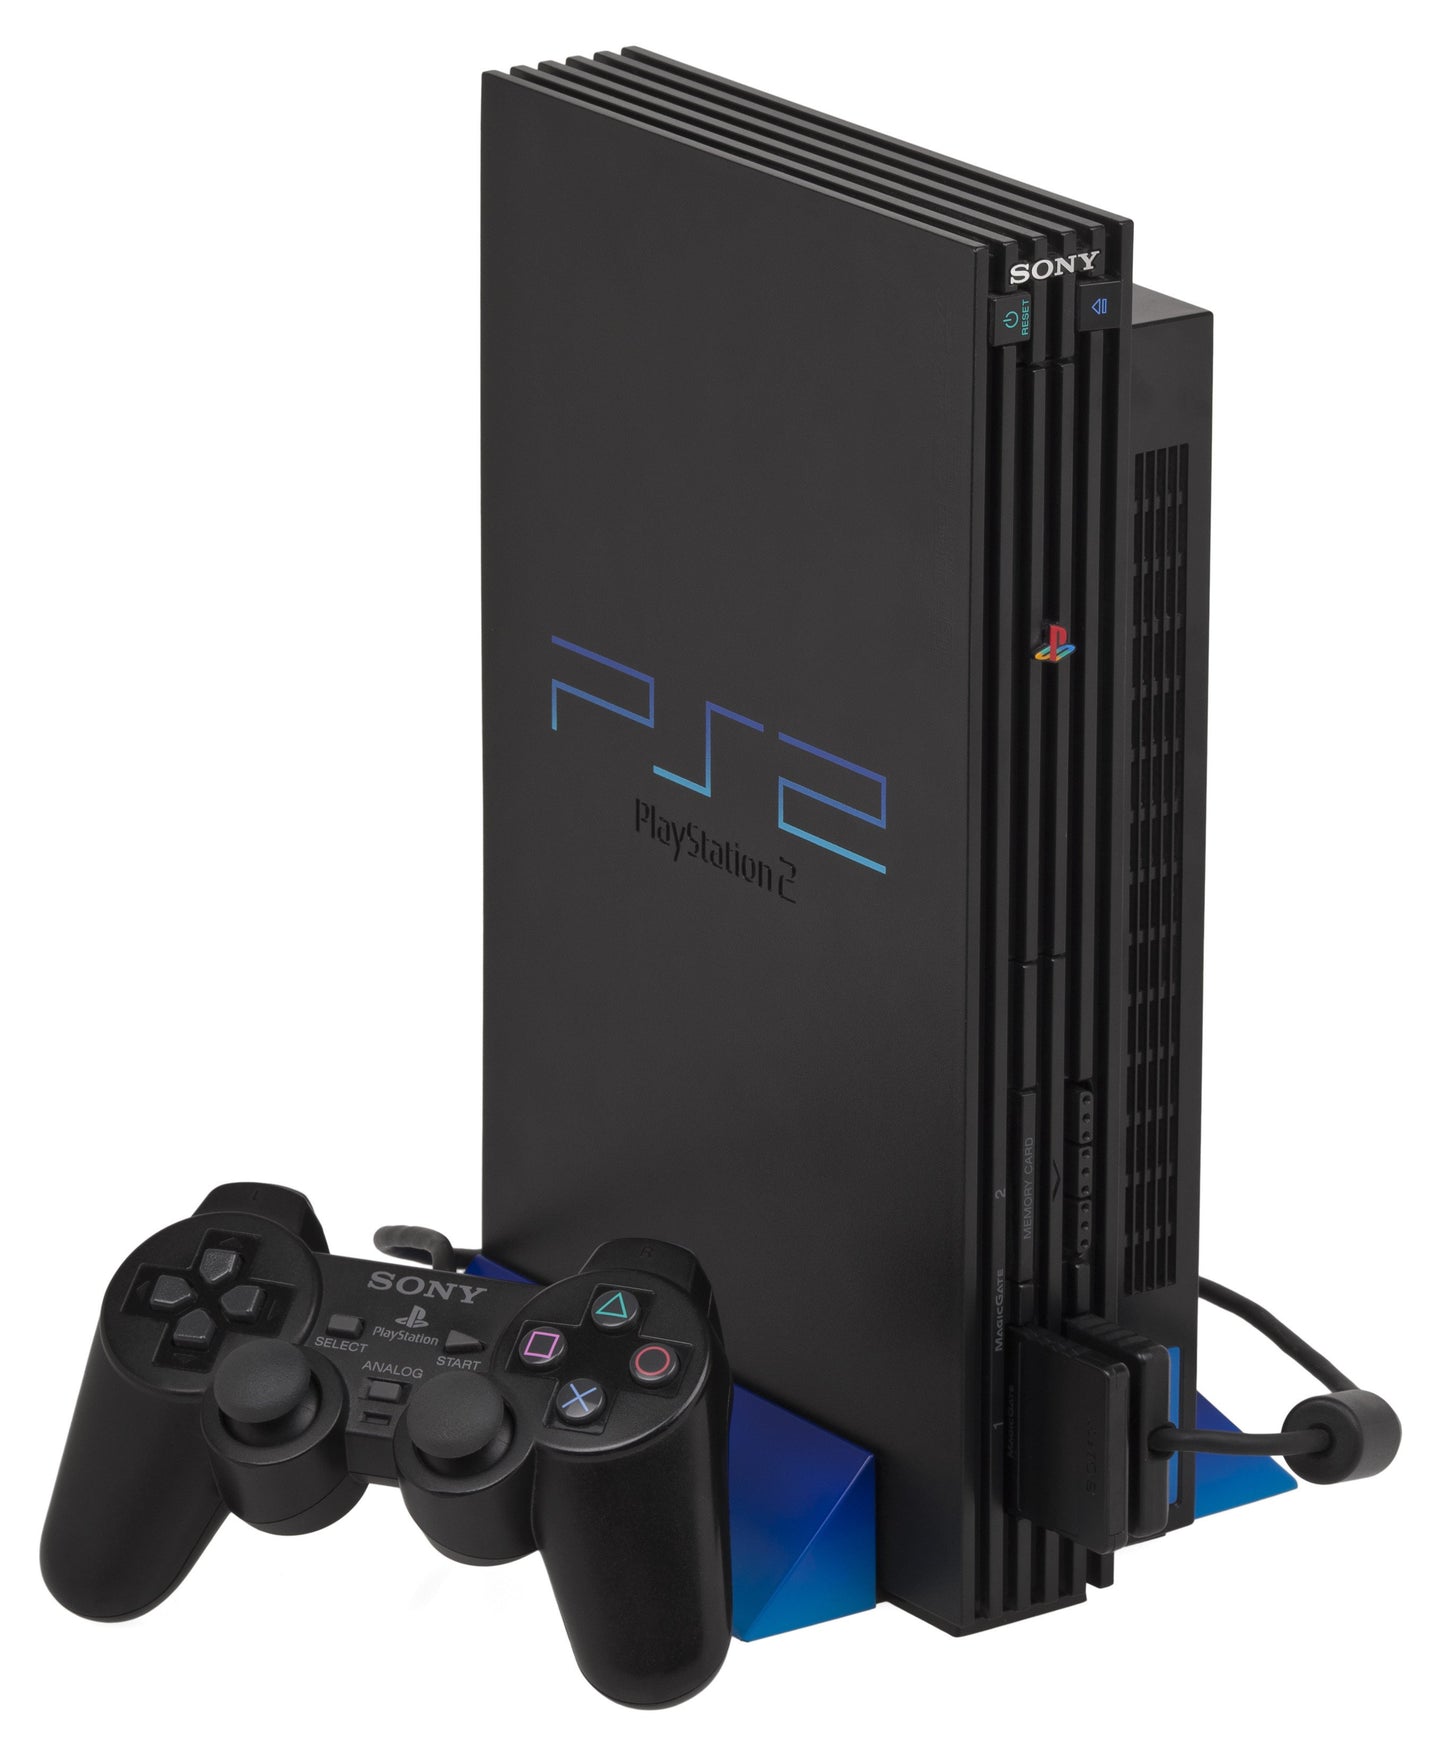 J2Games.com | Playstation 2 System (Playstation 2) (Pre-Played - Game System).